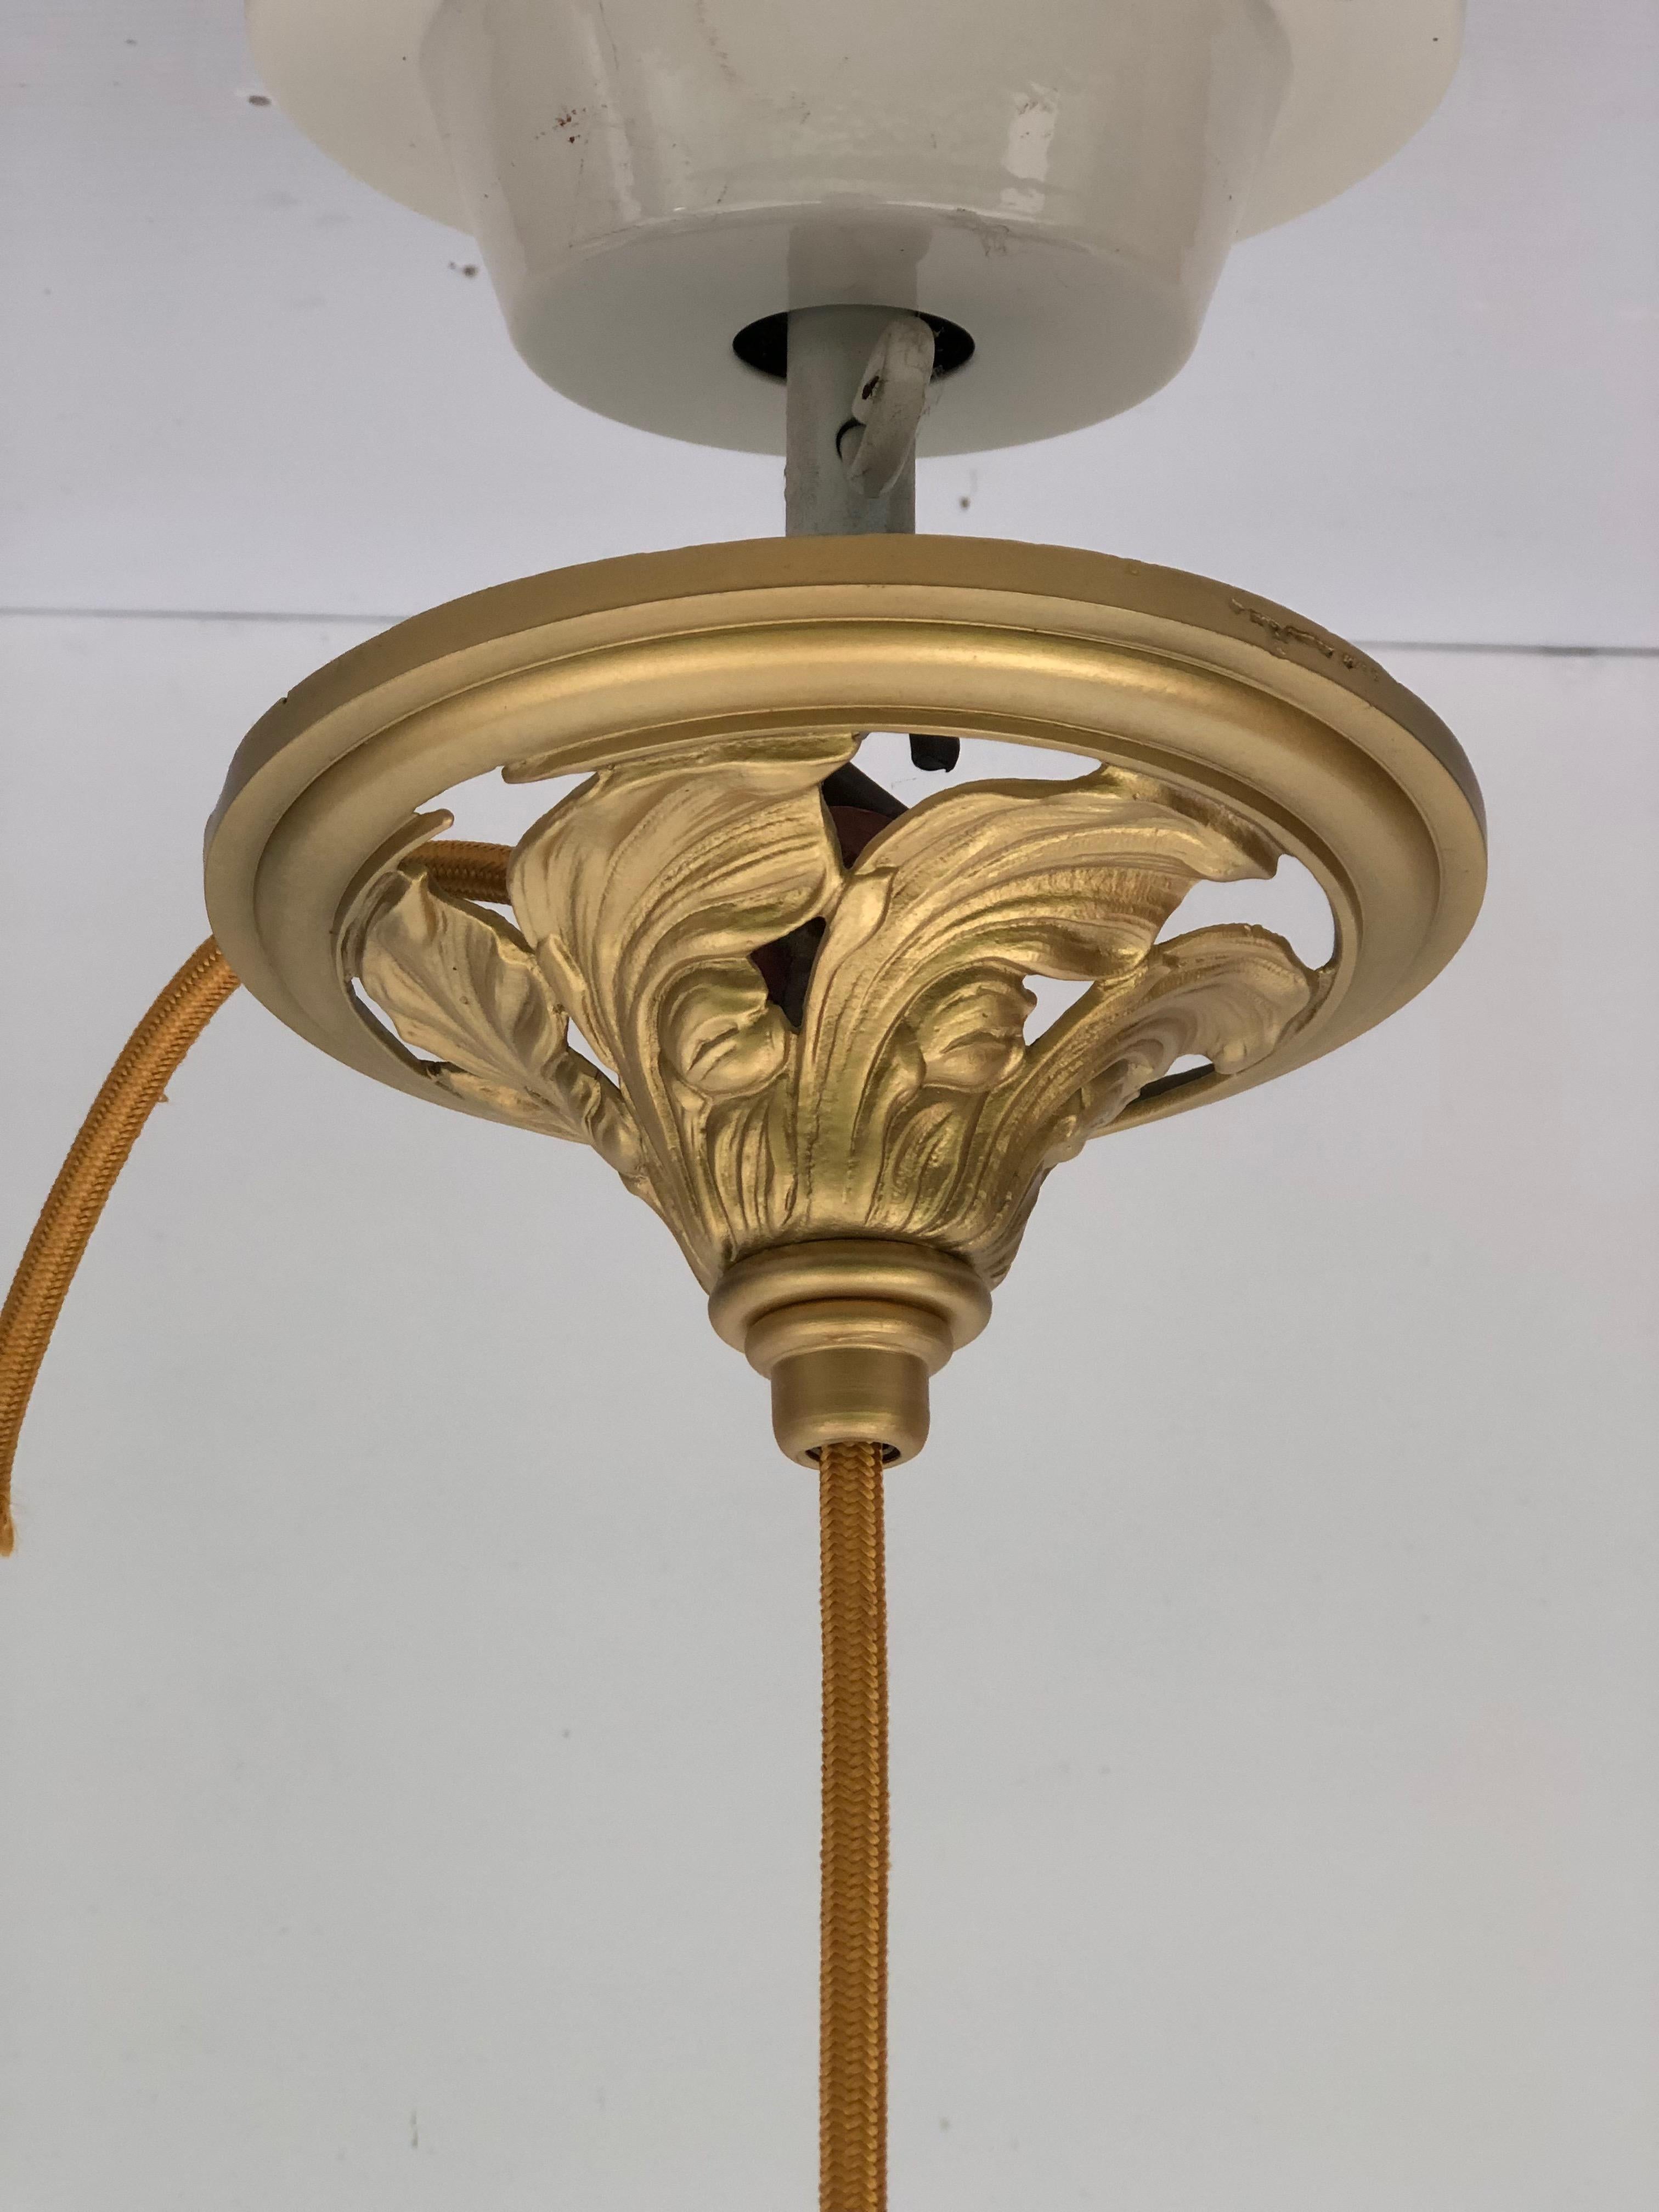 Art Nouveau suspension circa 1900.
Bronze frame and opalescent glass tulip.
In perfect condition and electrified.

Diameter: 11 cm
Height: 58 cm (hauteur totale) 19,5 cm (tulipe)